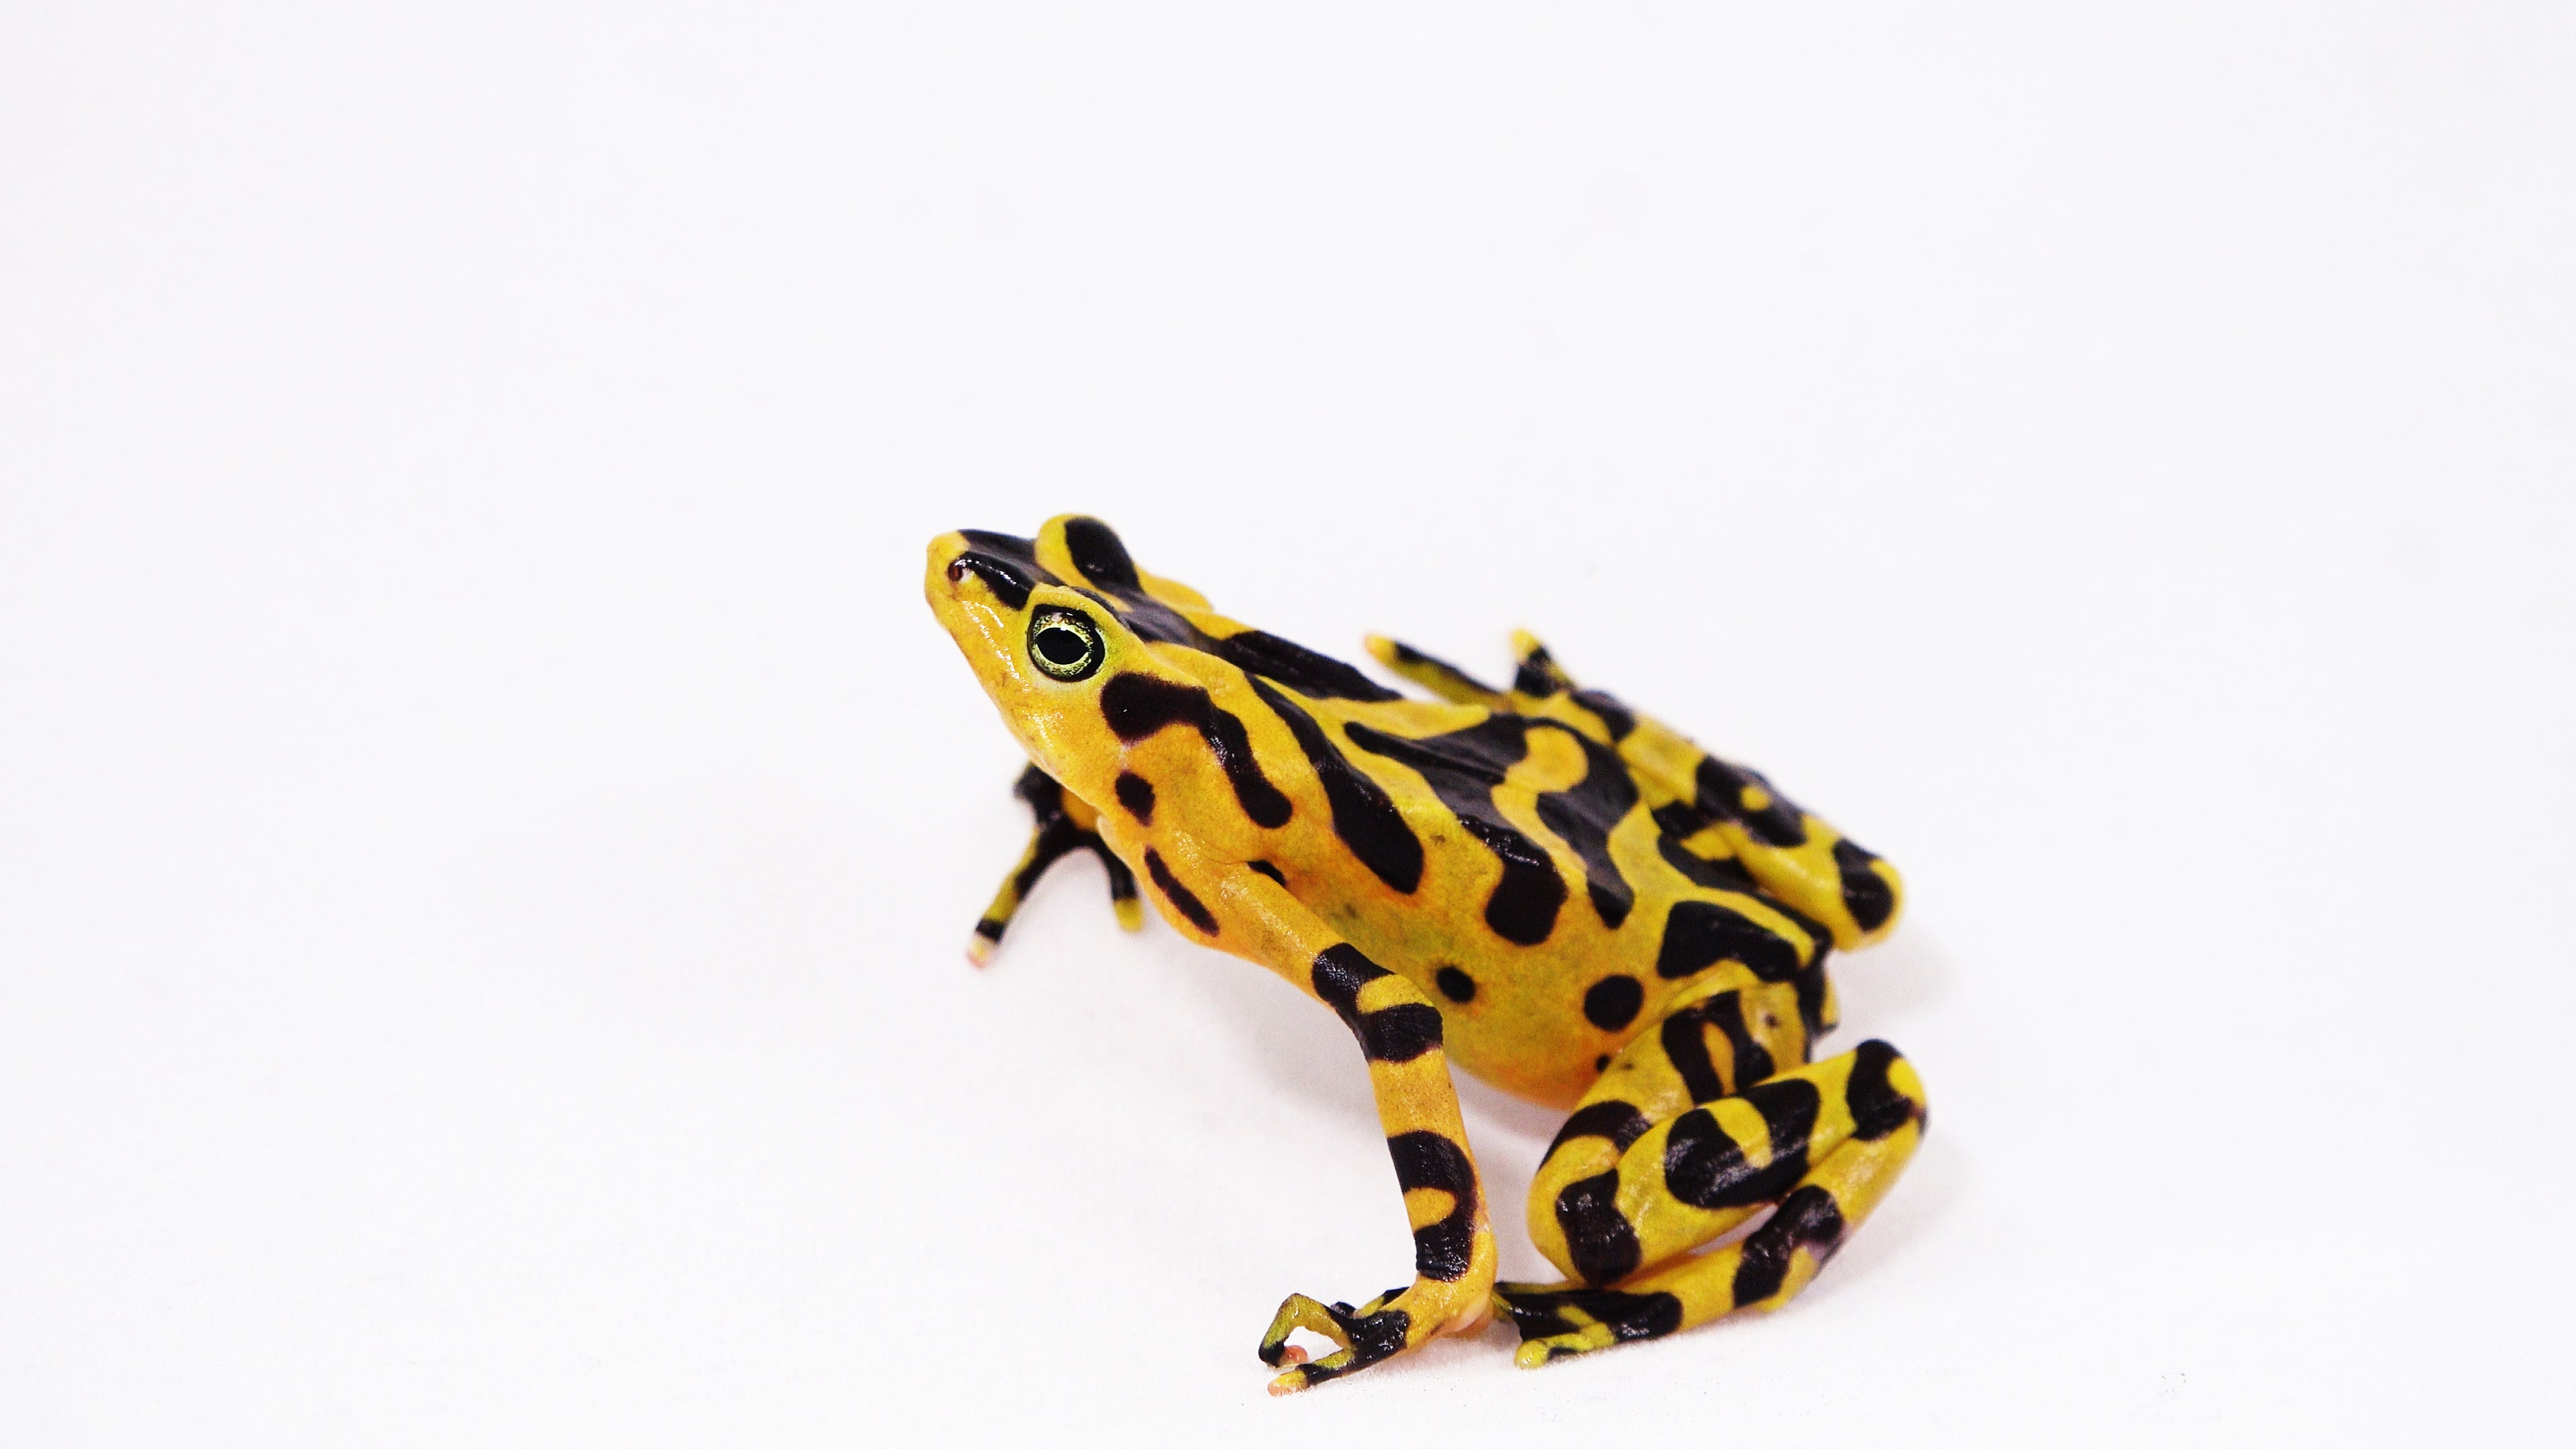 A Panamanian golden frog. (Photo: Smithsonian Institute)